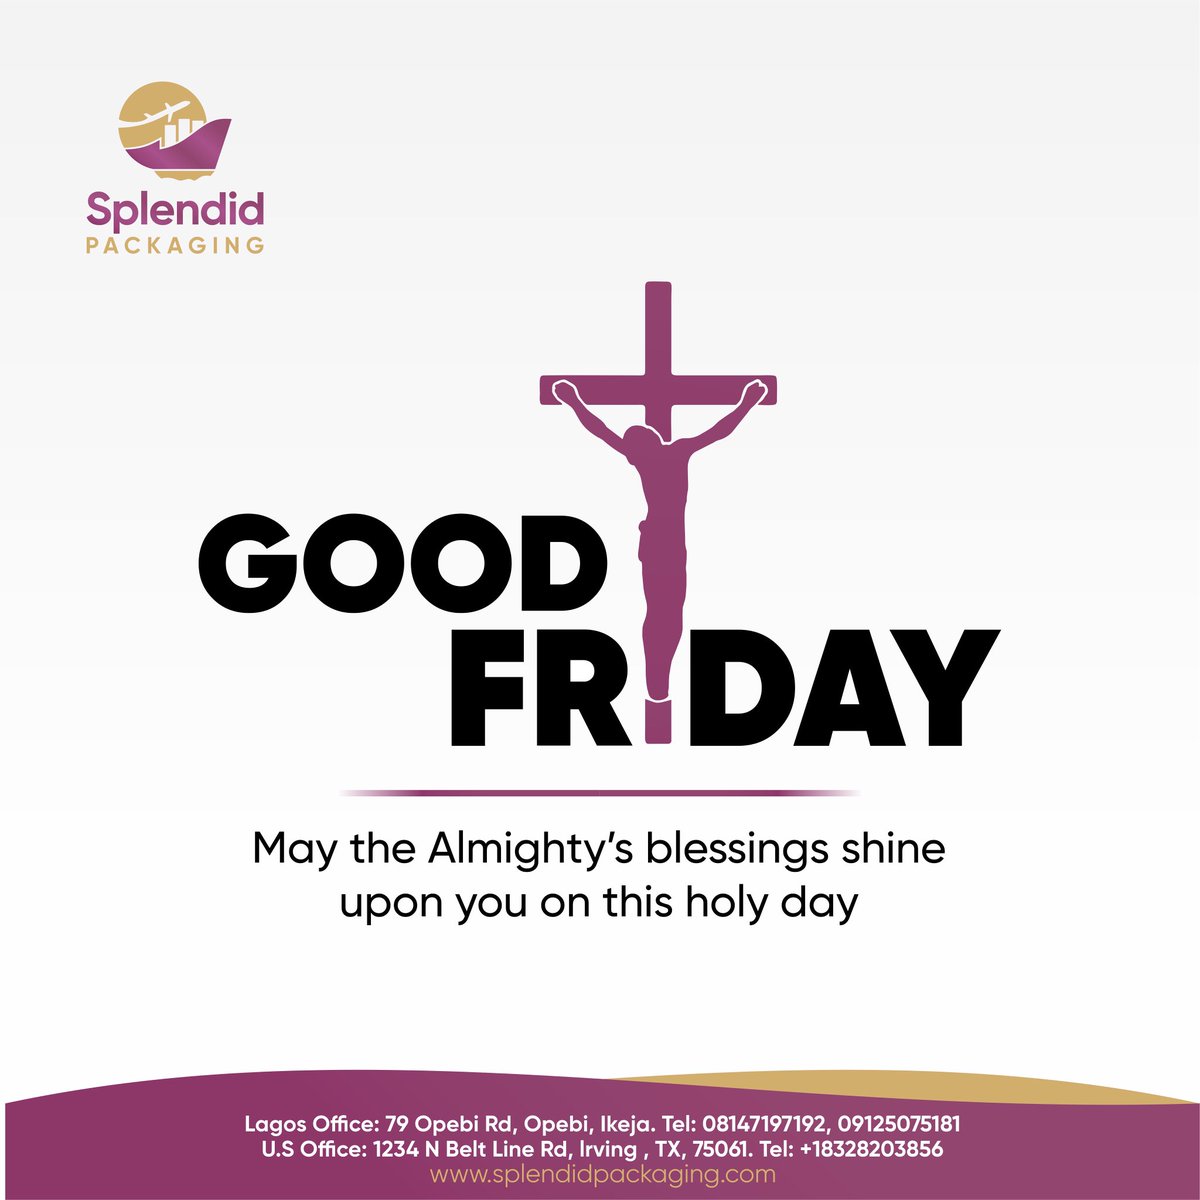 Wishing each and every one of us a blessed Good Friday.

On the occasion of this Holy day, May the blessings of the almighty shine upon us all. Amen.

#goodfriday #easter #goodfriday2023  #shipping #us #ustonigeria #dallastonigeria #chinatonigeria #uktonigeria #shopper #import